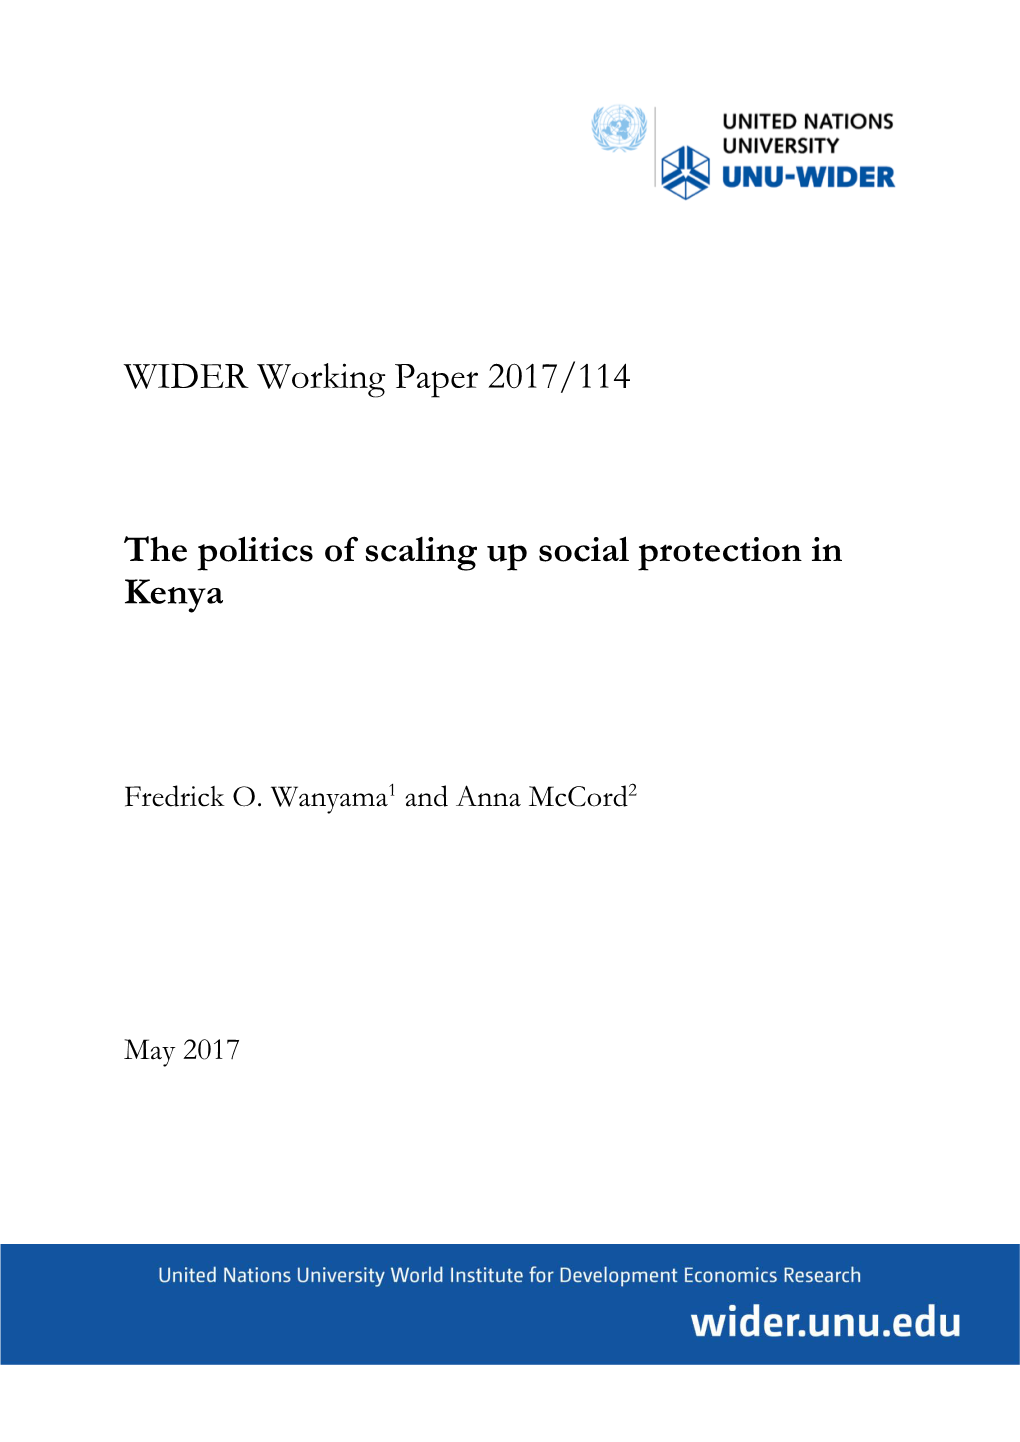 WIDER Working Paper 2017/114 the Politics of Scaling up Social